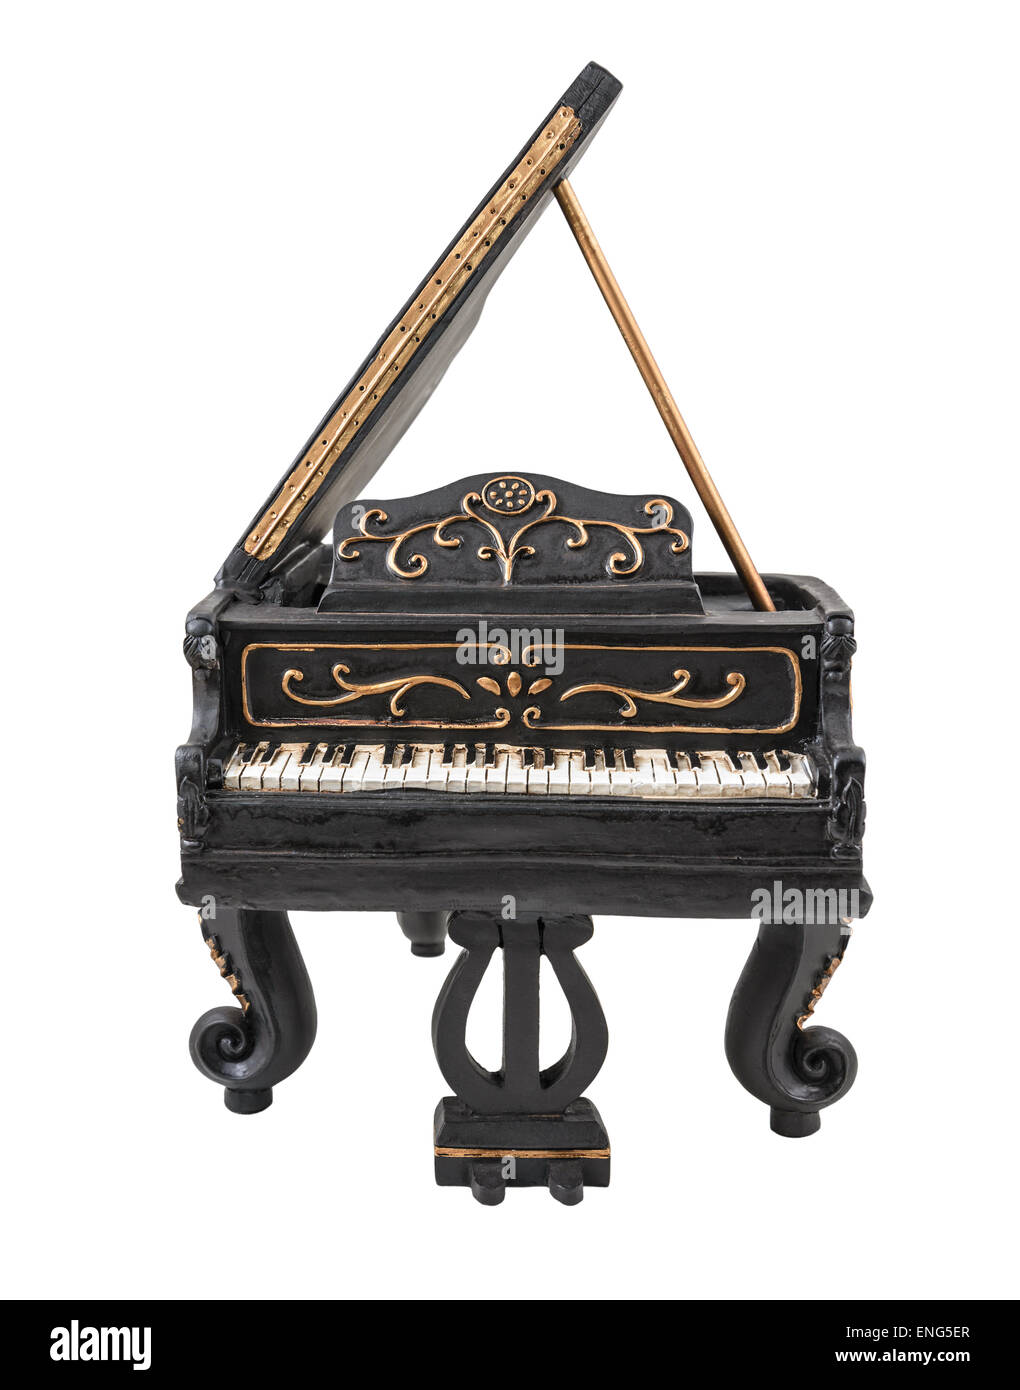 The  model of piano is photographed on a white background Stock Photo